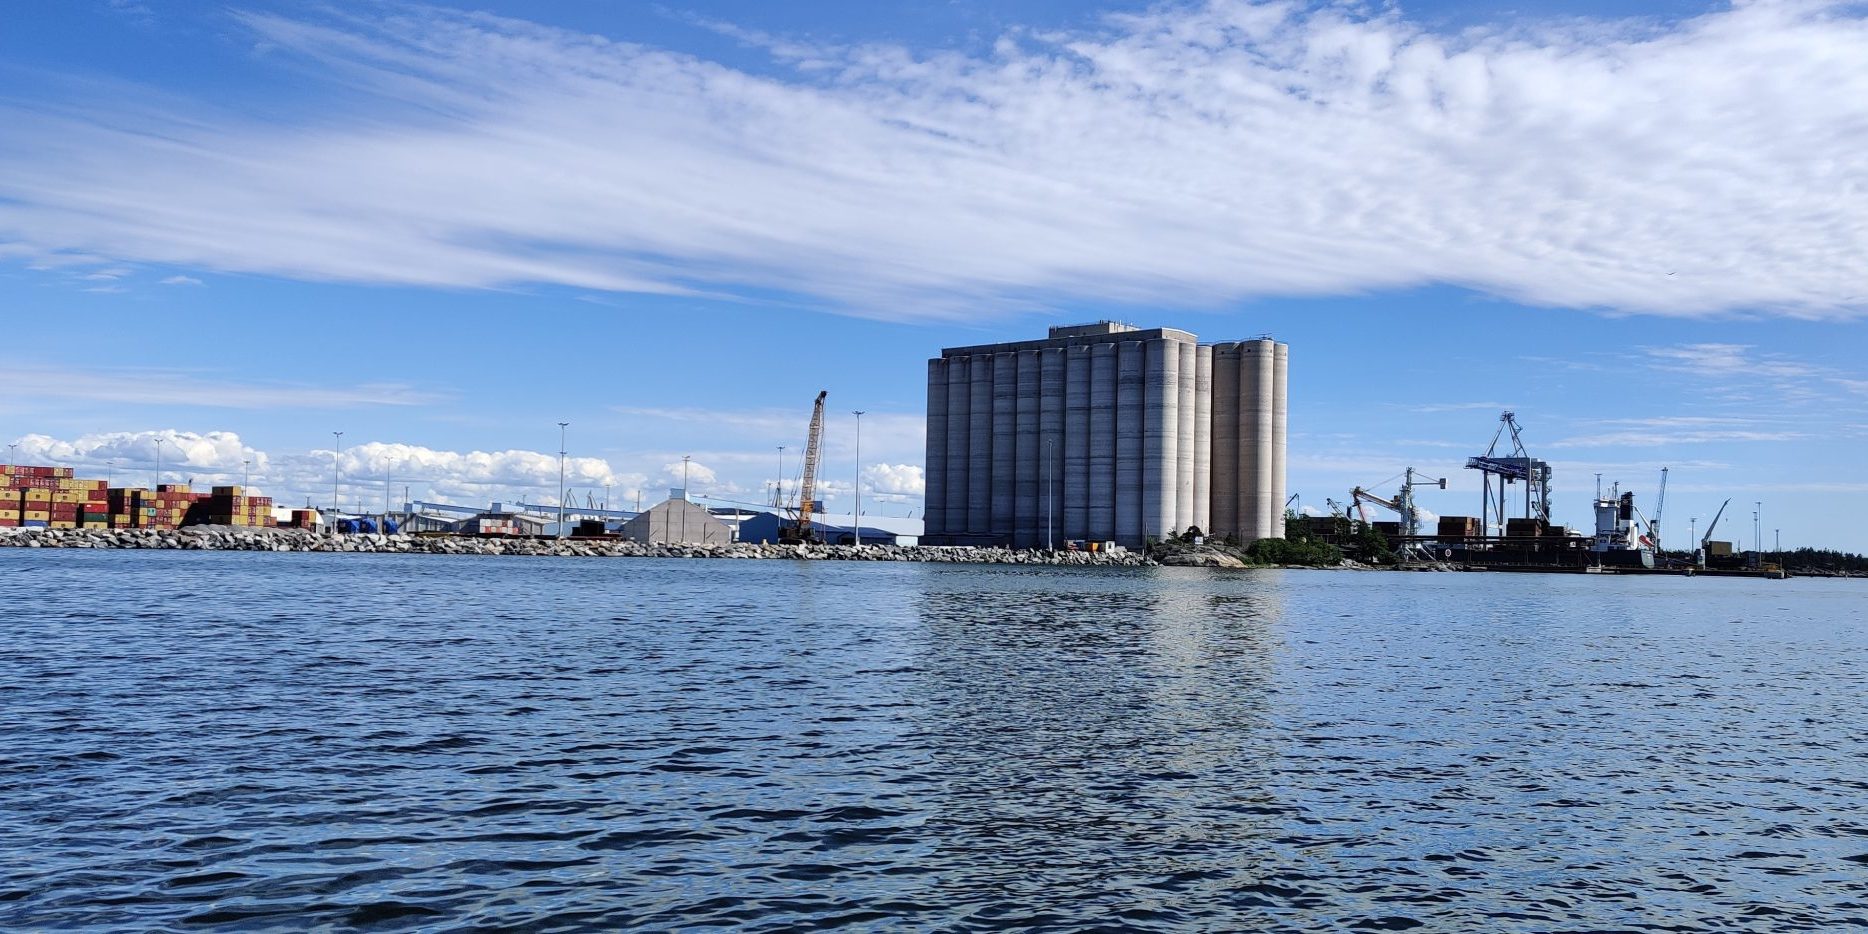 The port of Rauma as seen from the sea.